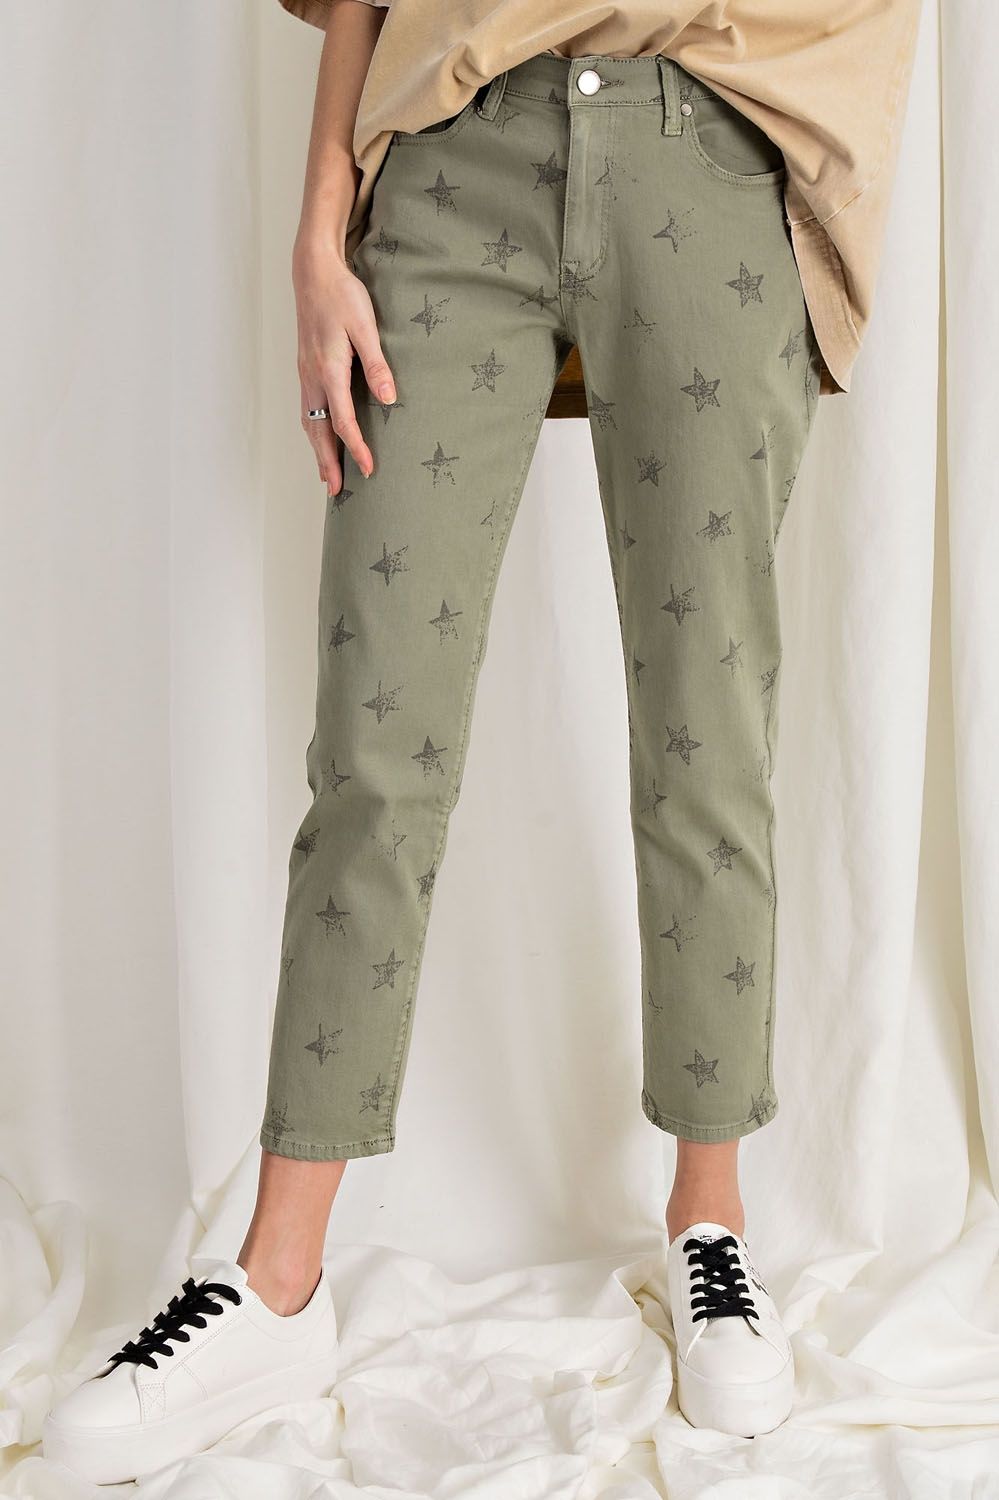 Buy Easel Star Print Distressed Stretch Twill Washed Chino Pants by Sensual Fashion Boutique by Sensual Fashion Boutique